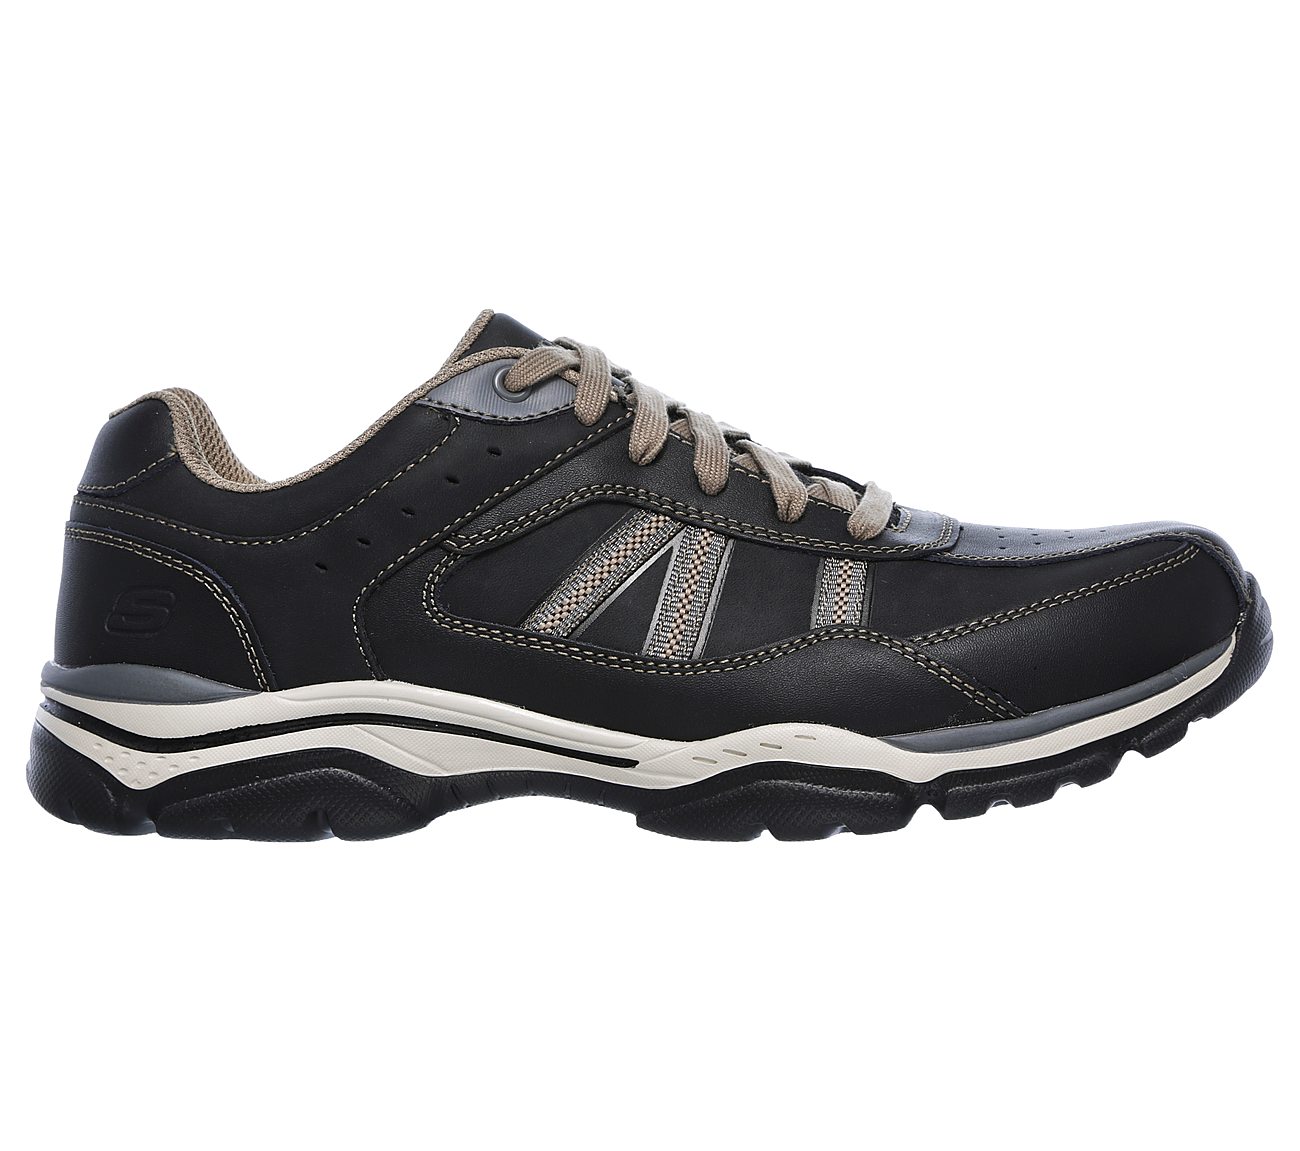 SKECHERS Relaxed Fit: Rovato - Texon 